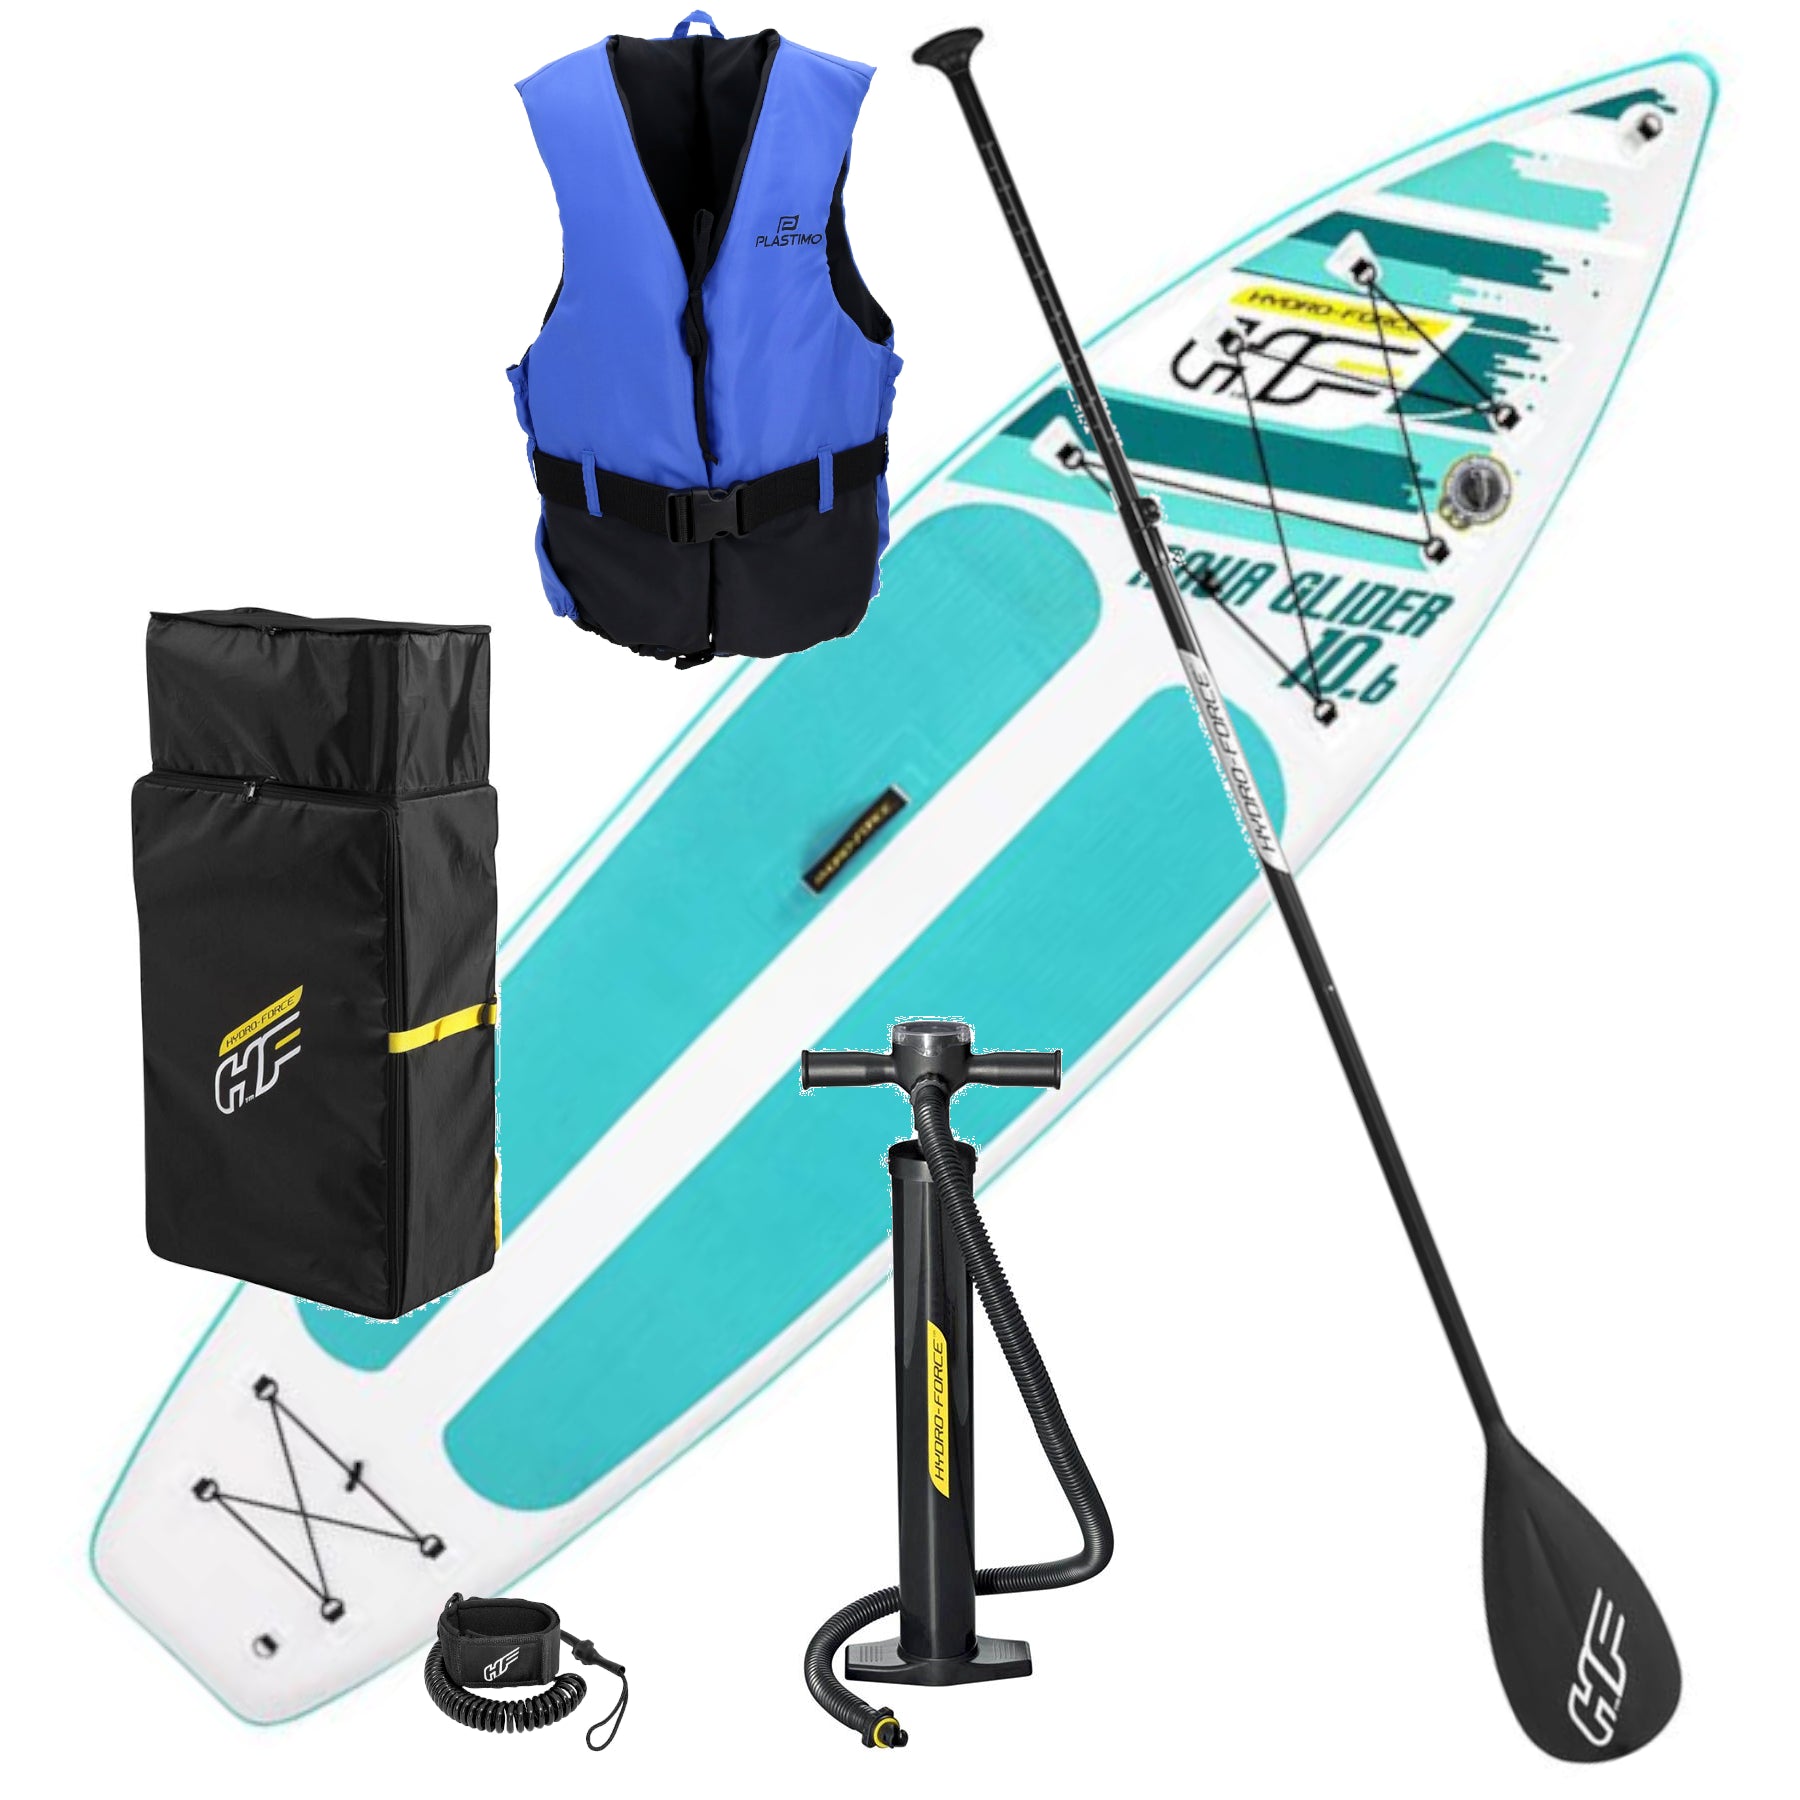 10ft 6" Stand Up Paddle Board 4.75" Hydro Force Aqua Glider SUP Set